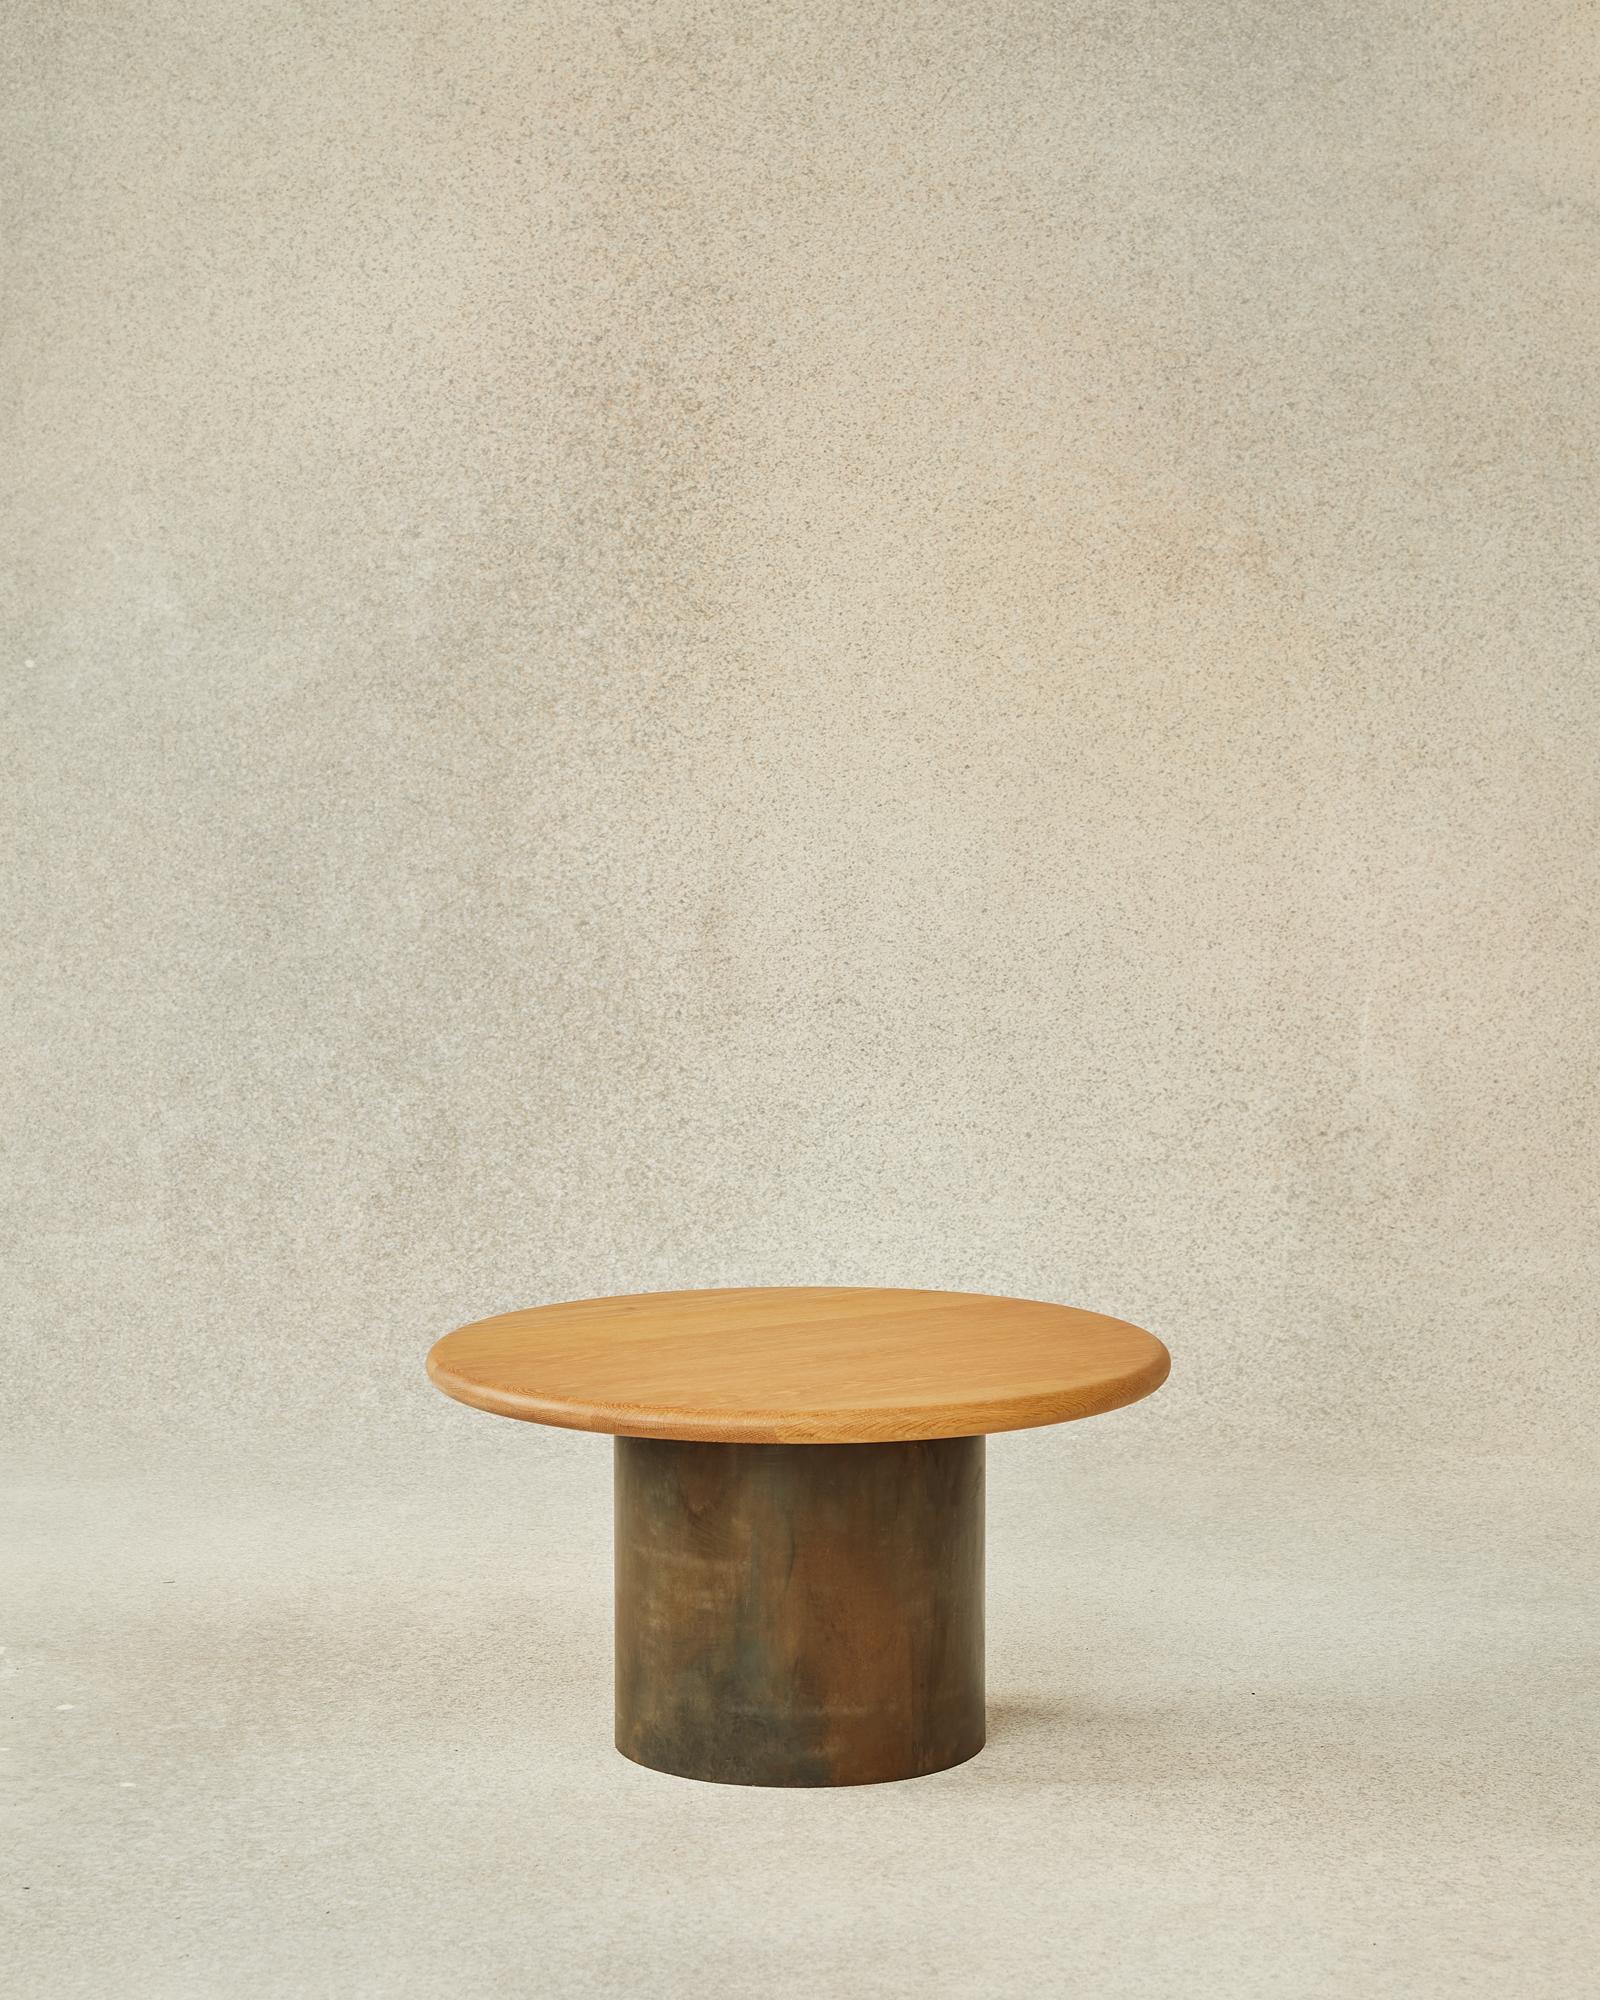 The Raindrop 600 is a mid-sized Raindrop, falling within the coffee table Set but equally a perfectly sized side table for your home and now available in a range of finishes to suit any interior or style. The raindrops nestle together to form a